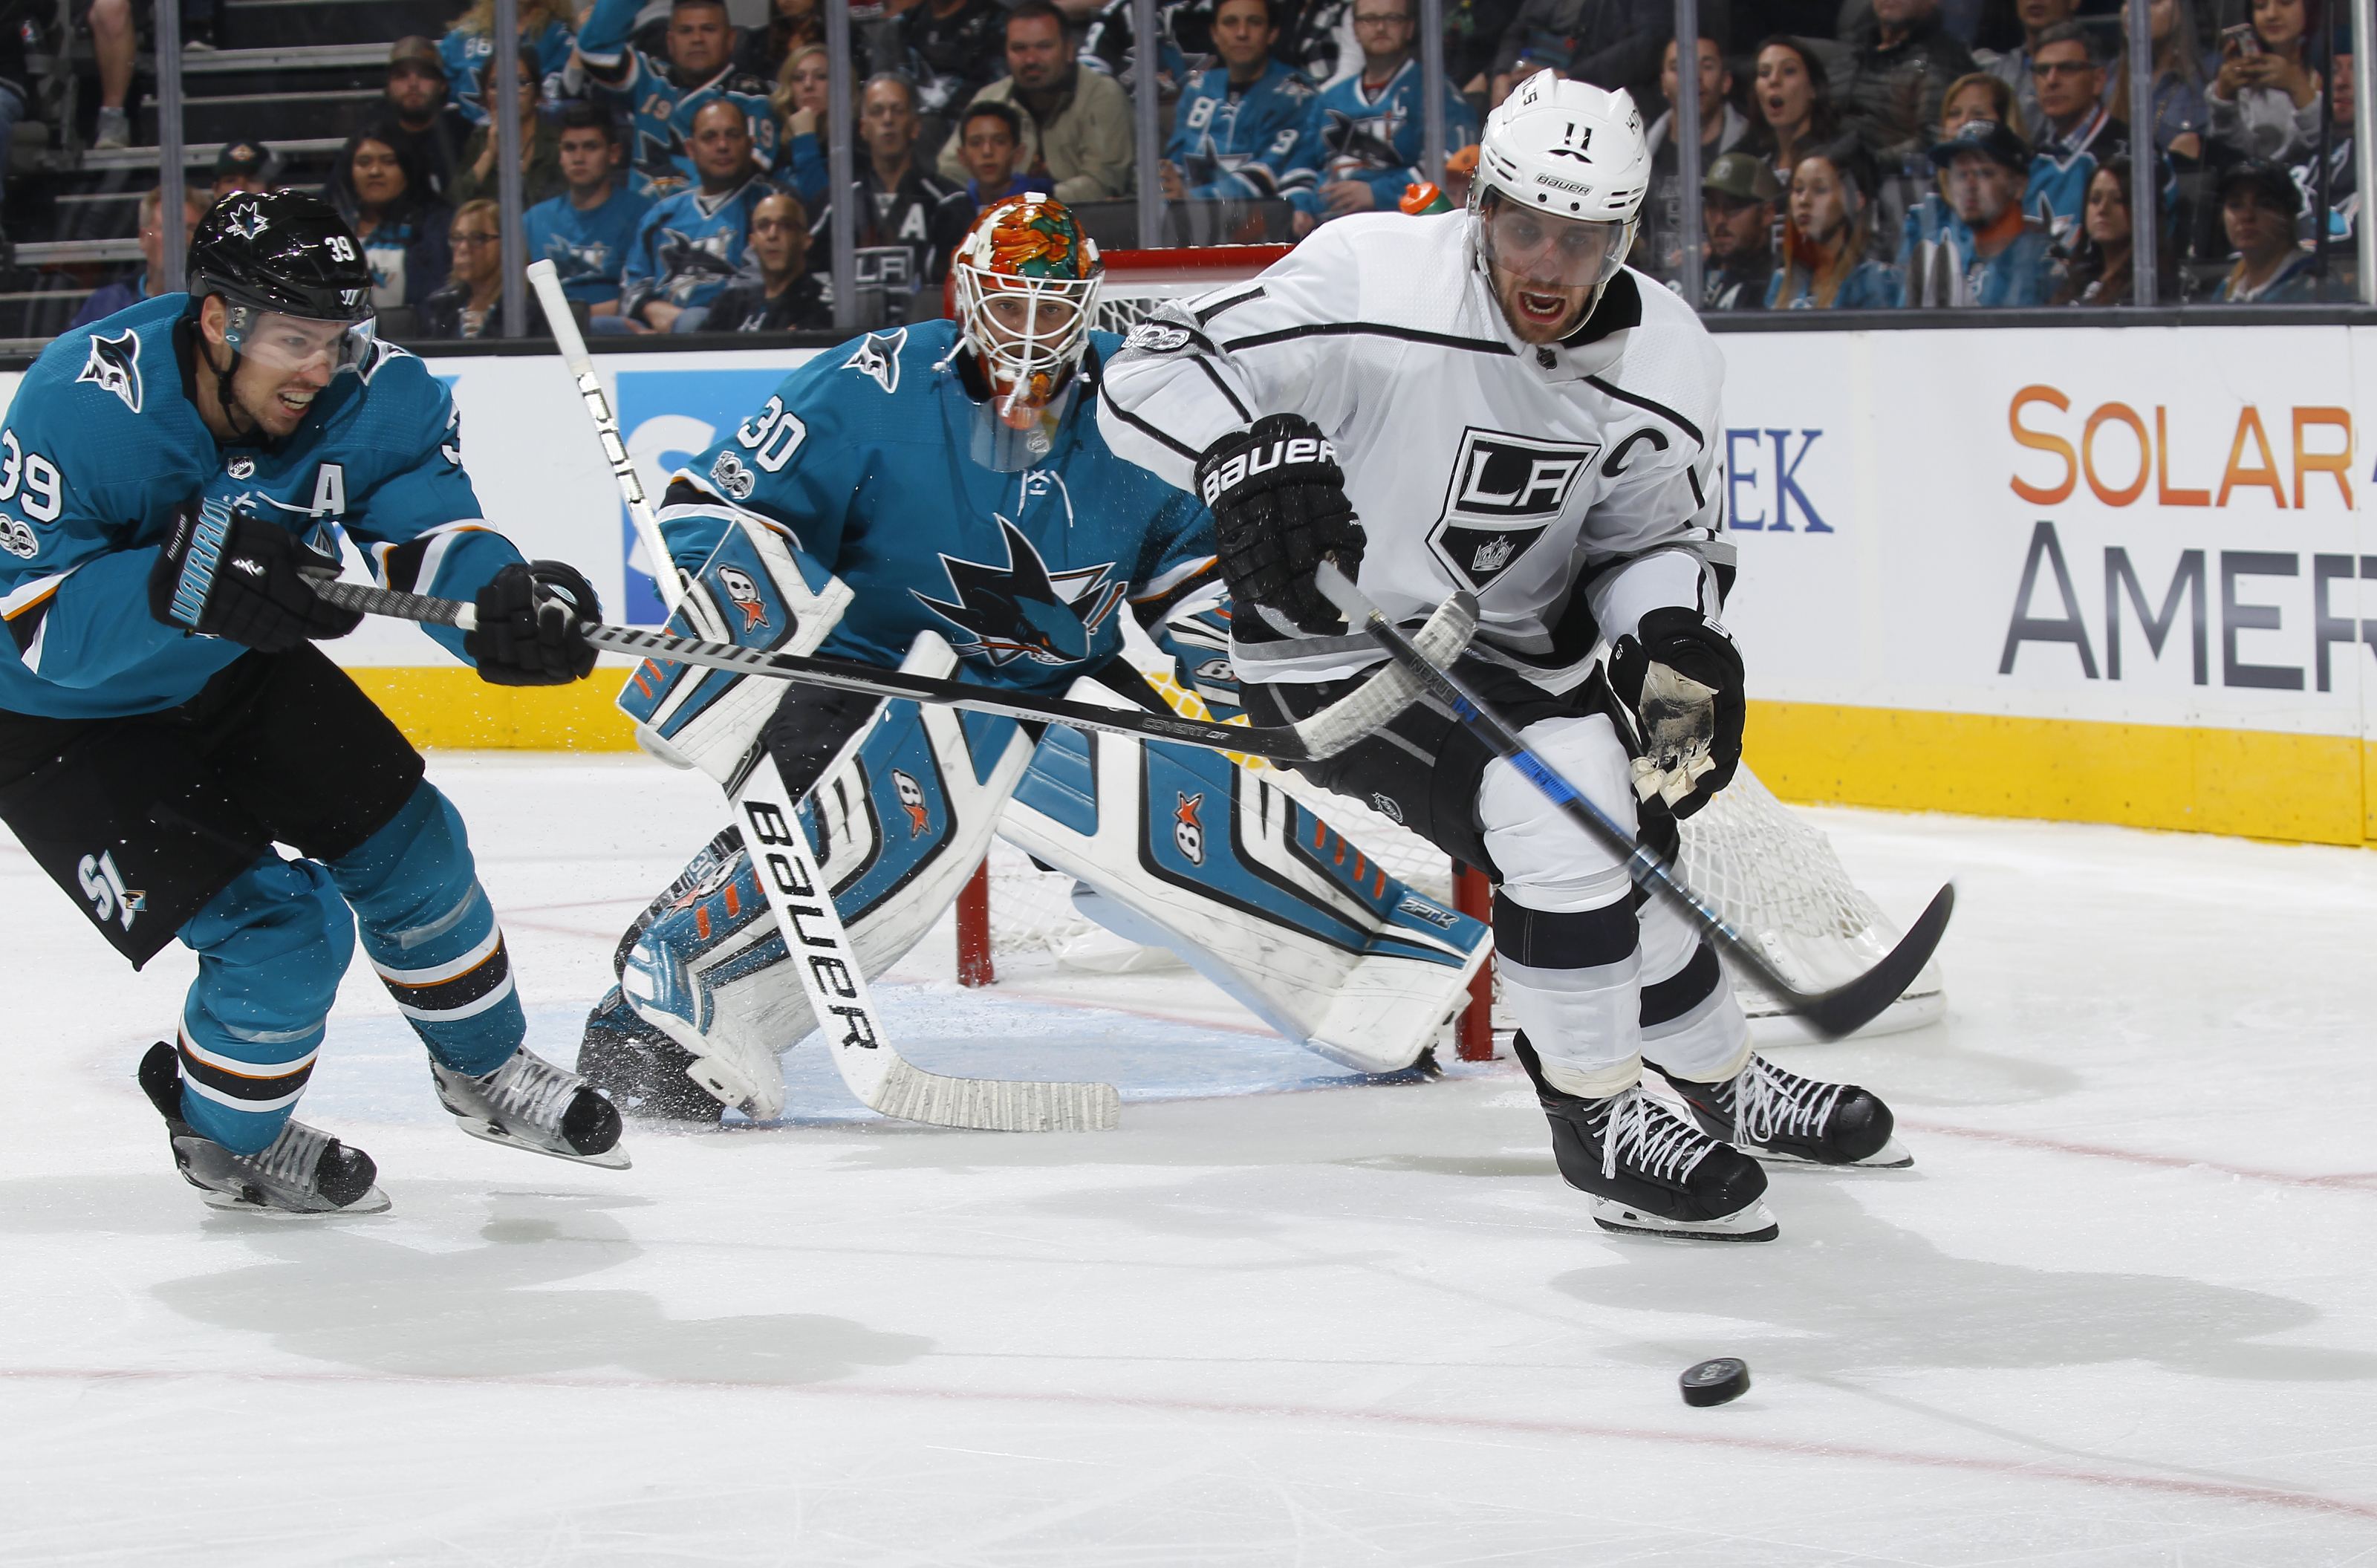 LA Kings - The FIRST thing Anze Kopitar did following his